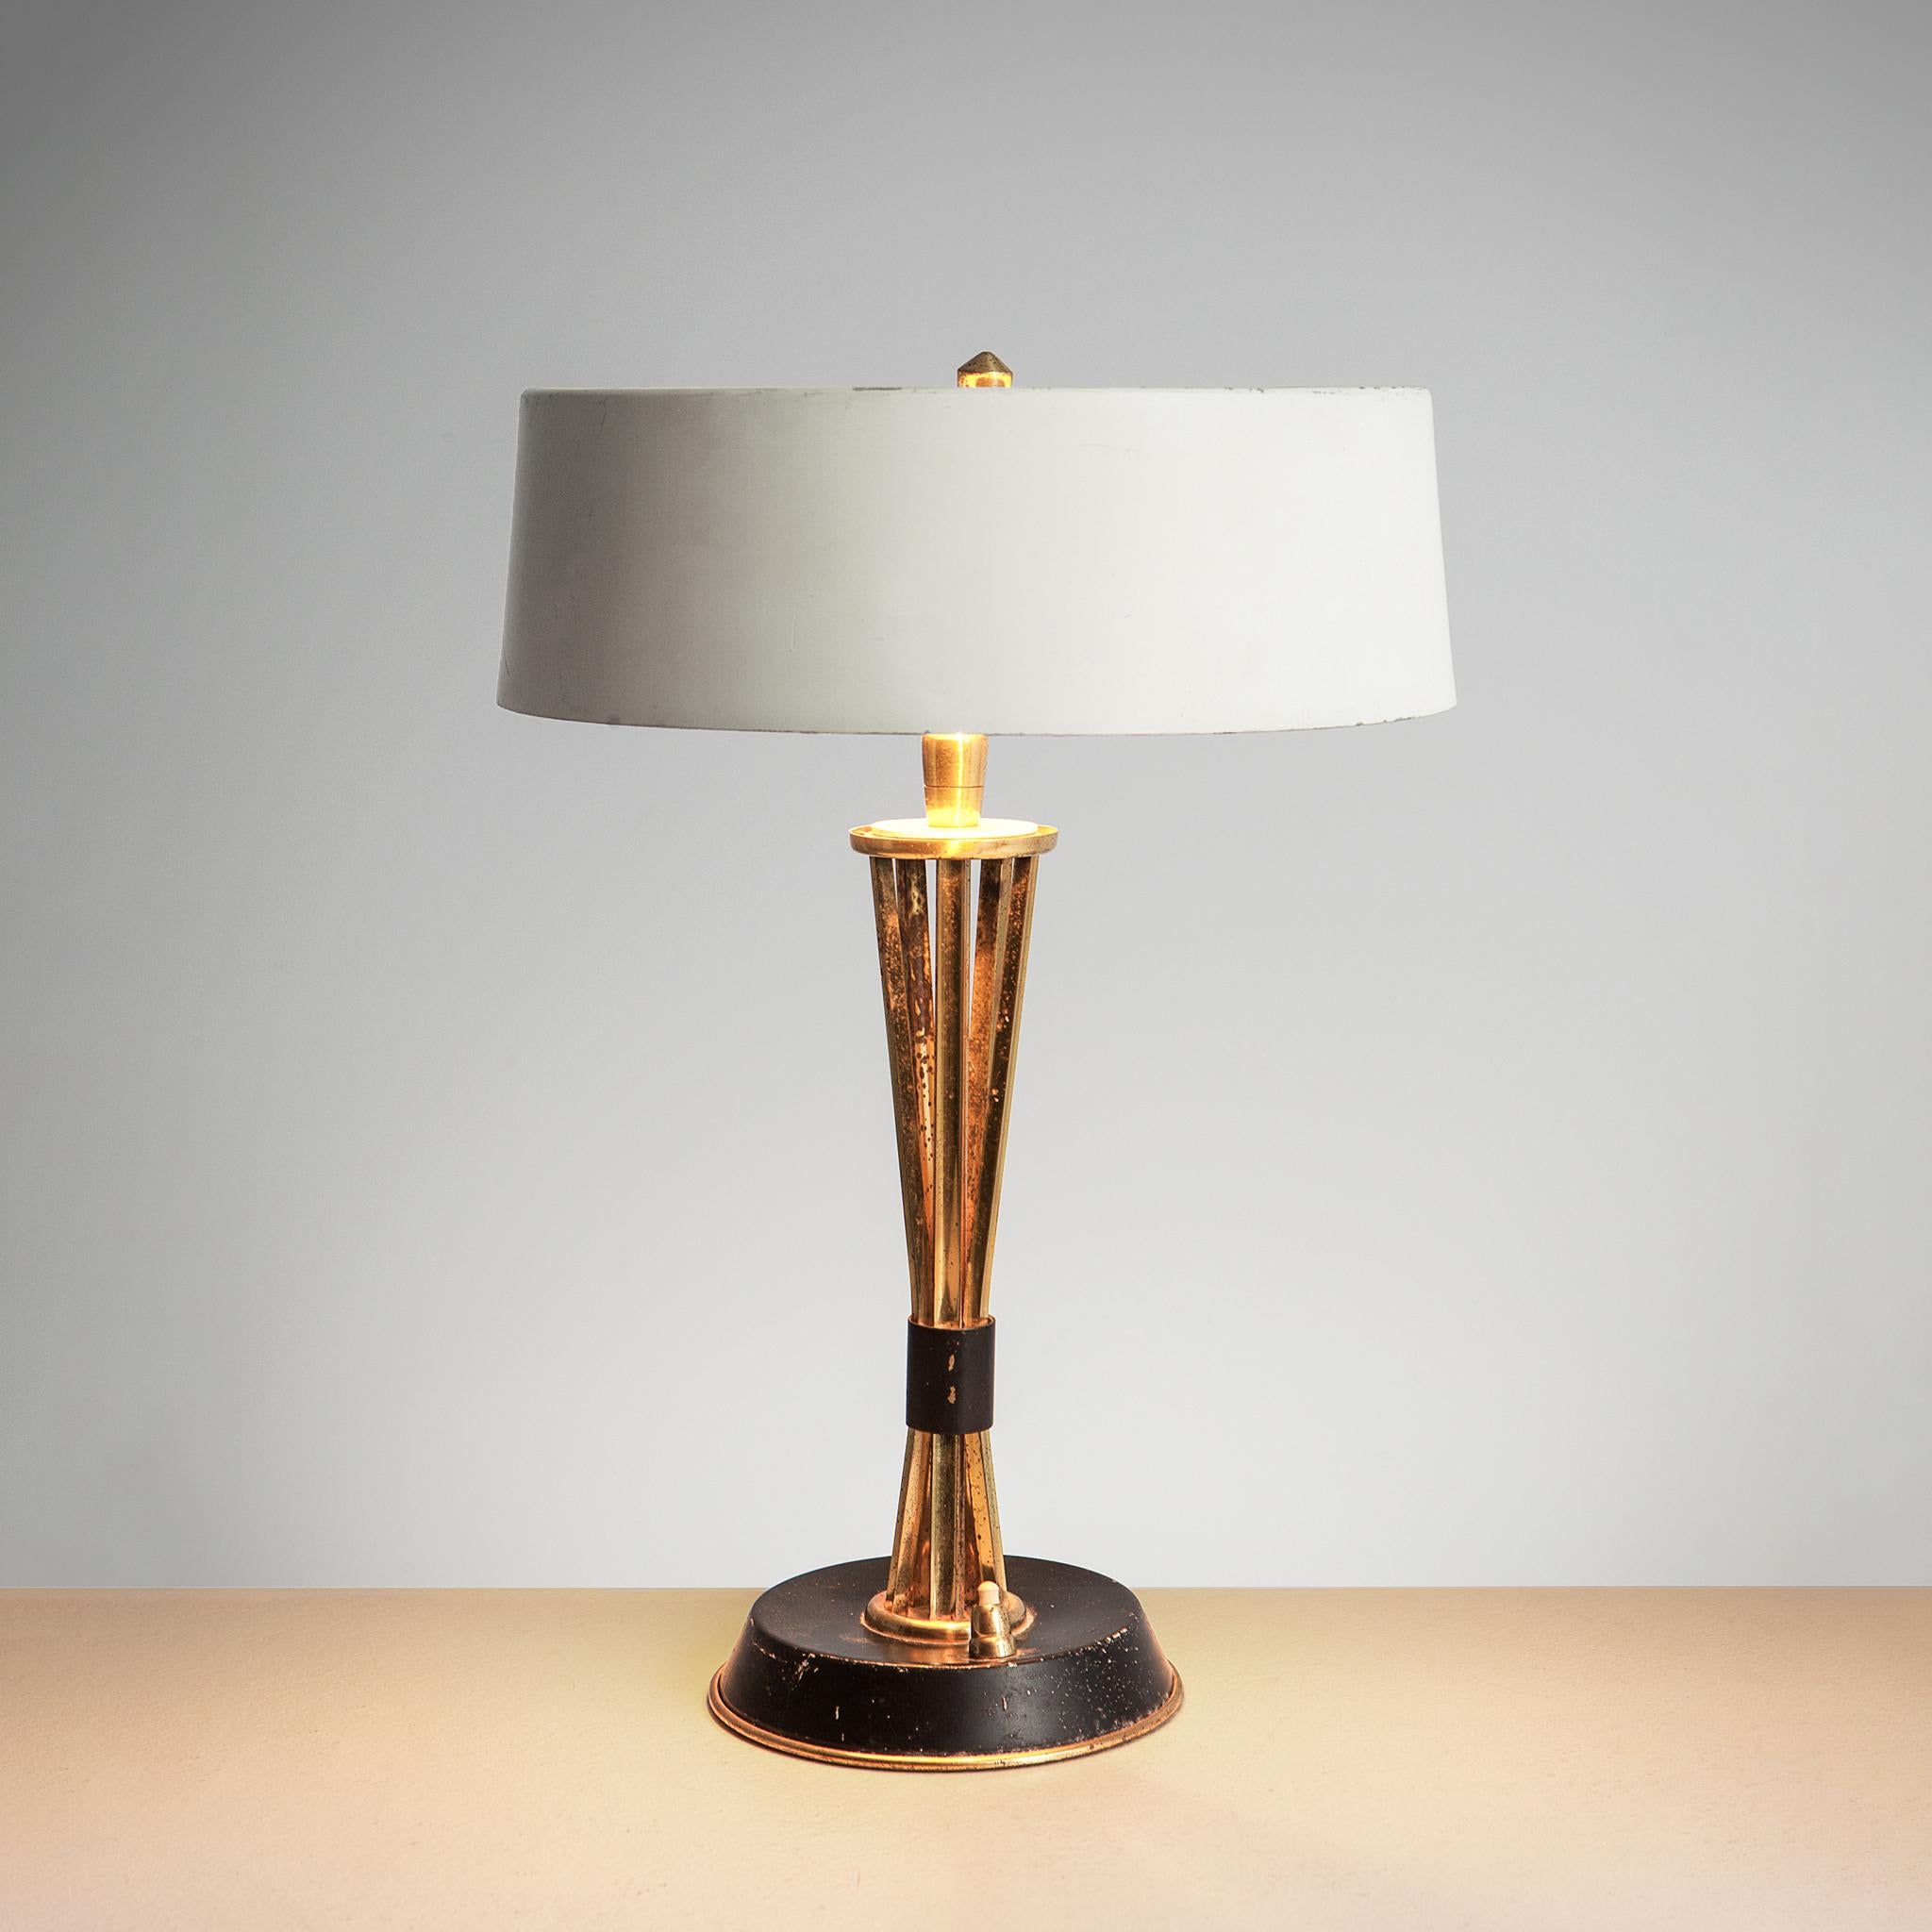 Oscar Torlasco for Lumi Milano, table light in brass and metal, Italy, 1960s.

Very elegant 1960s Italian table lamp designed by Oscar Torlasco for Lumi 
Milano. The stem is made of patinated brass and holds a smart adjustable round white coated